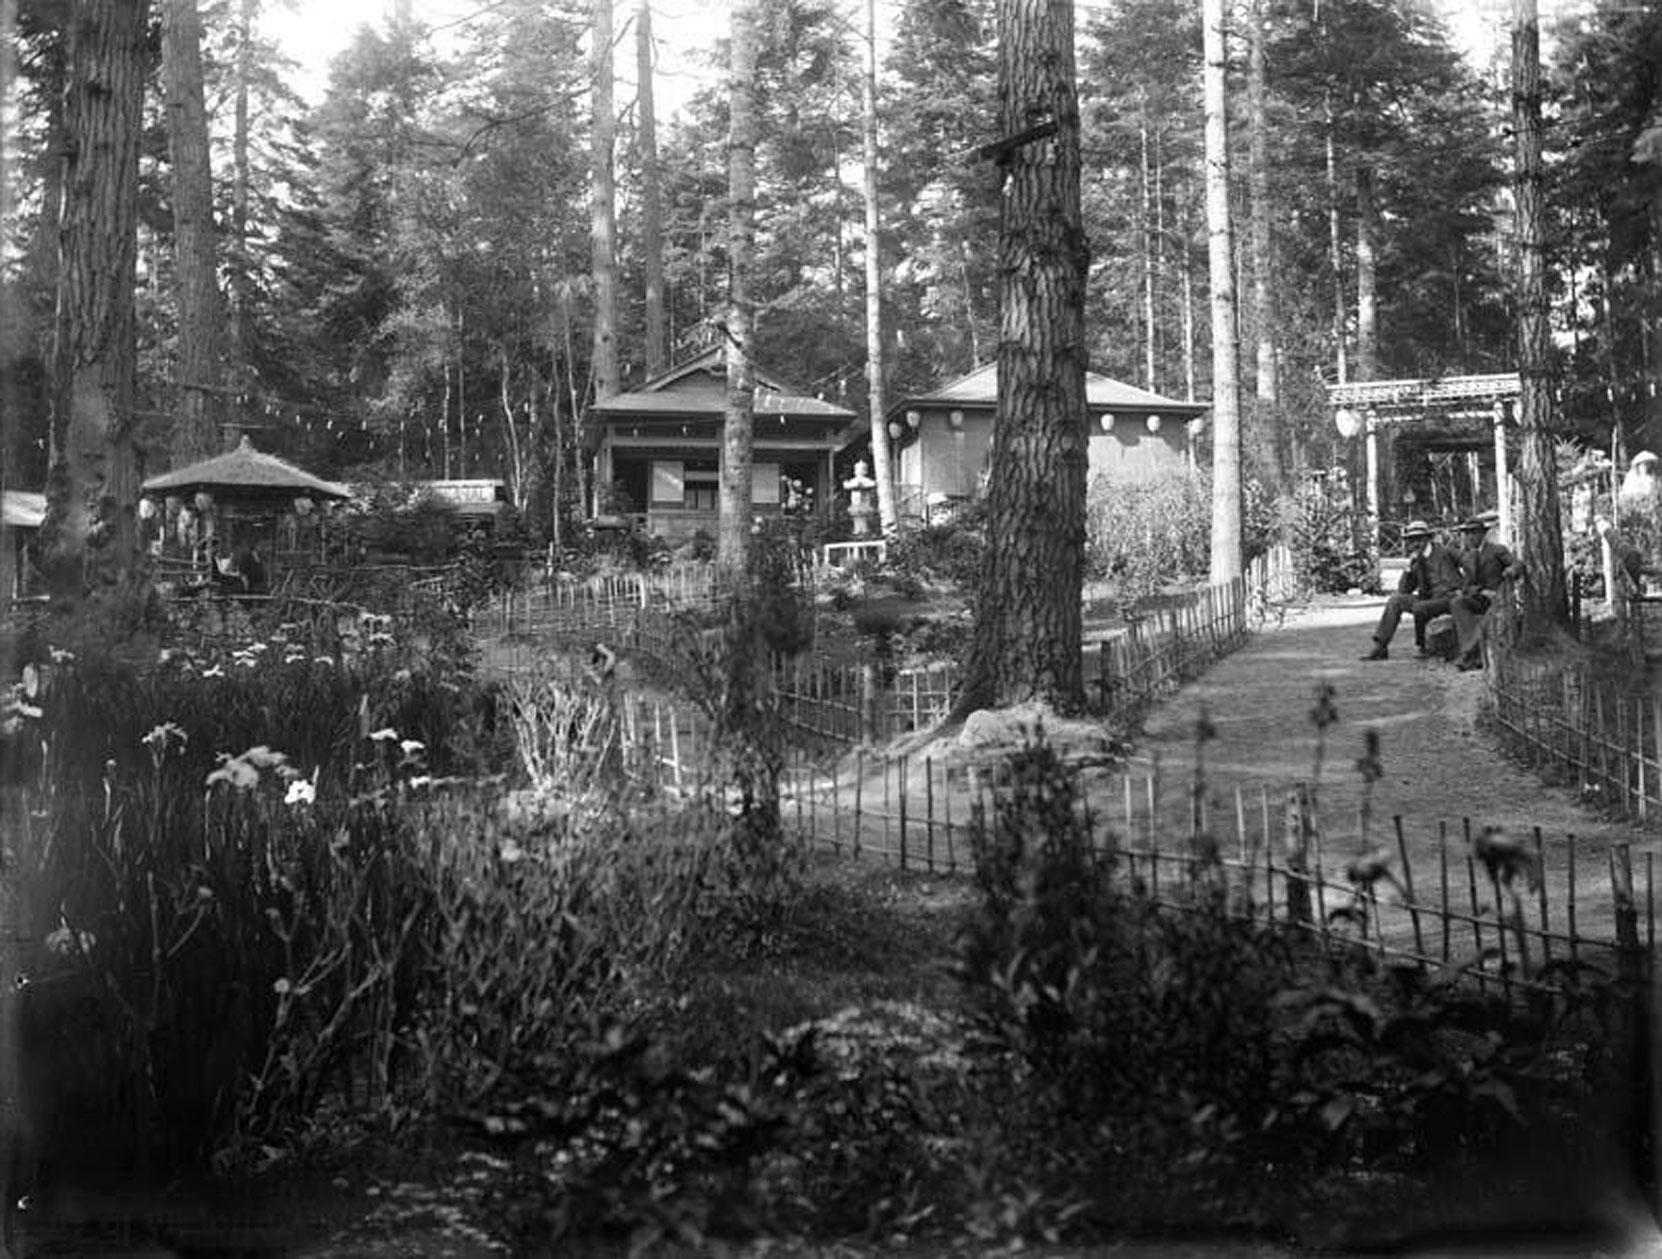 Japanese Tea House at Gorge Park, circa 1915 (City of Victoria Archives photo M09839)